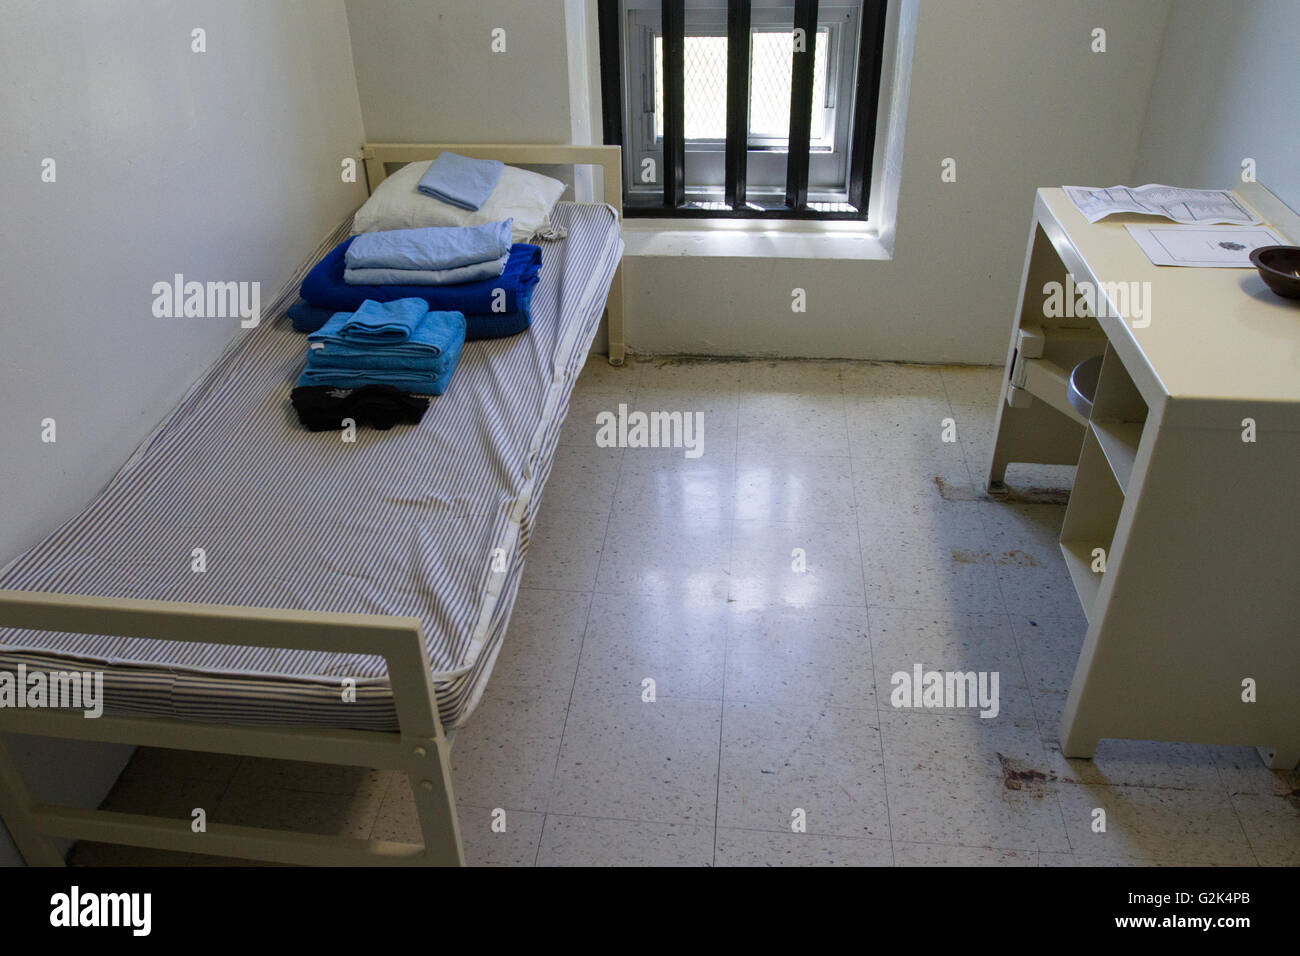 A Cell Inside The Segregation Unit At Collins Bay Penitentiary In